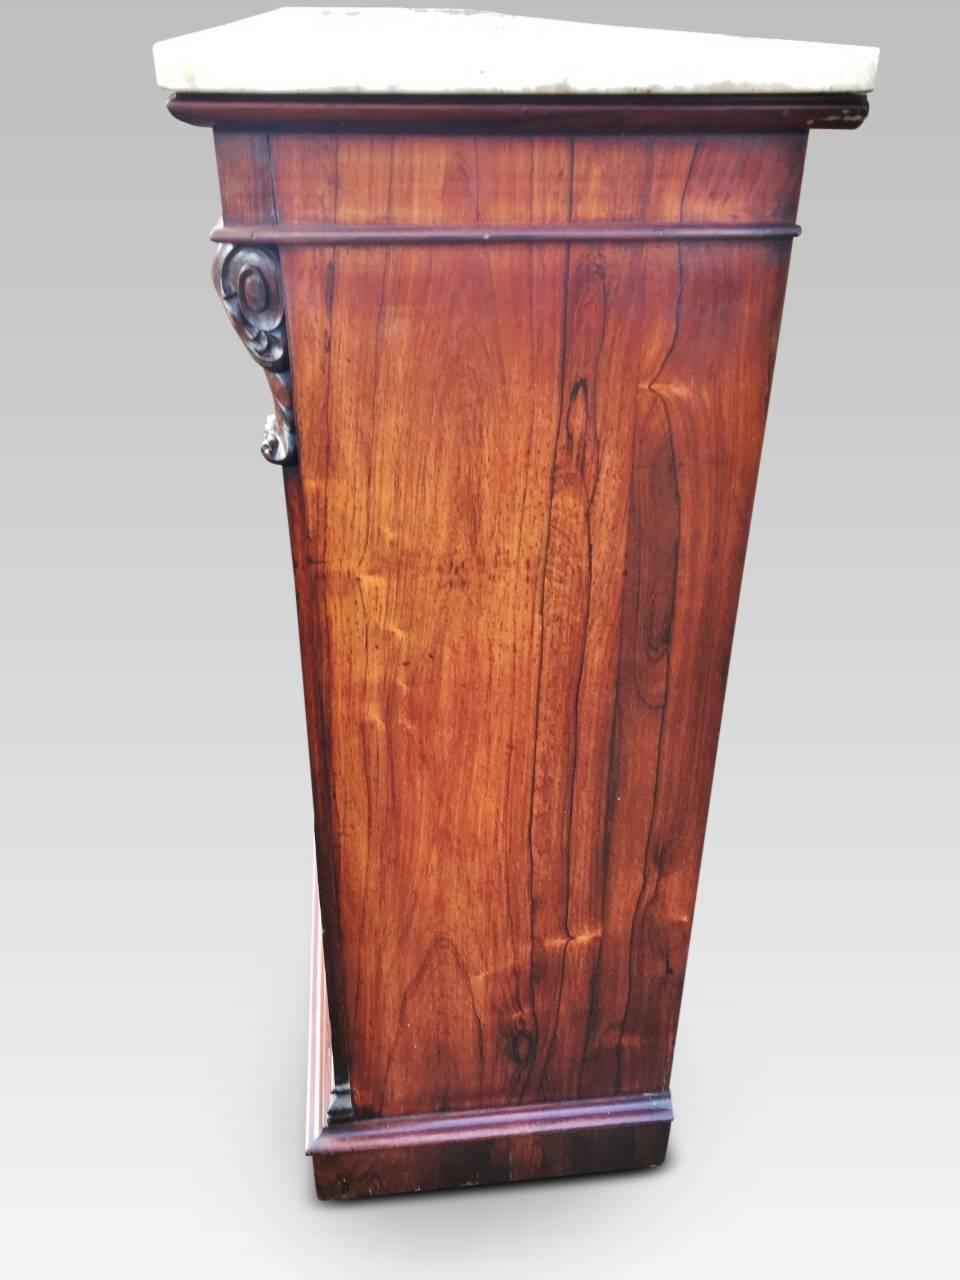 Veneer  Bookcase in Rosewood, Library Open Bookcase. English, circa 1850